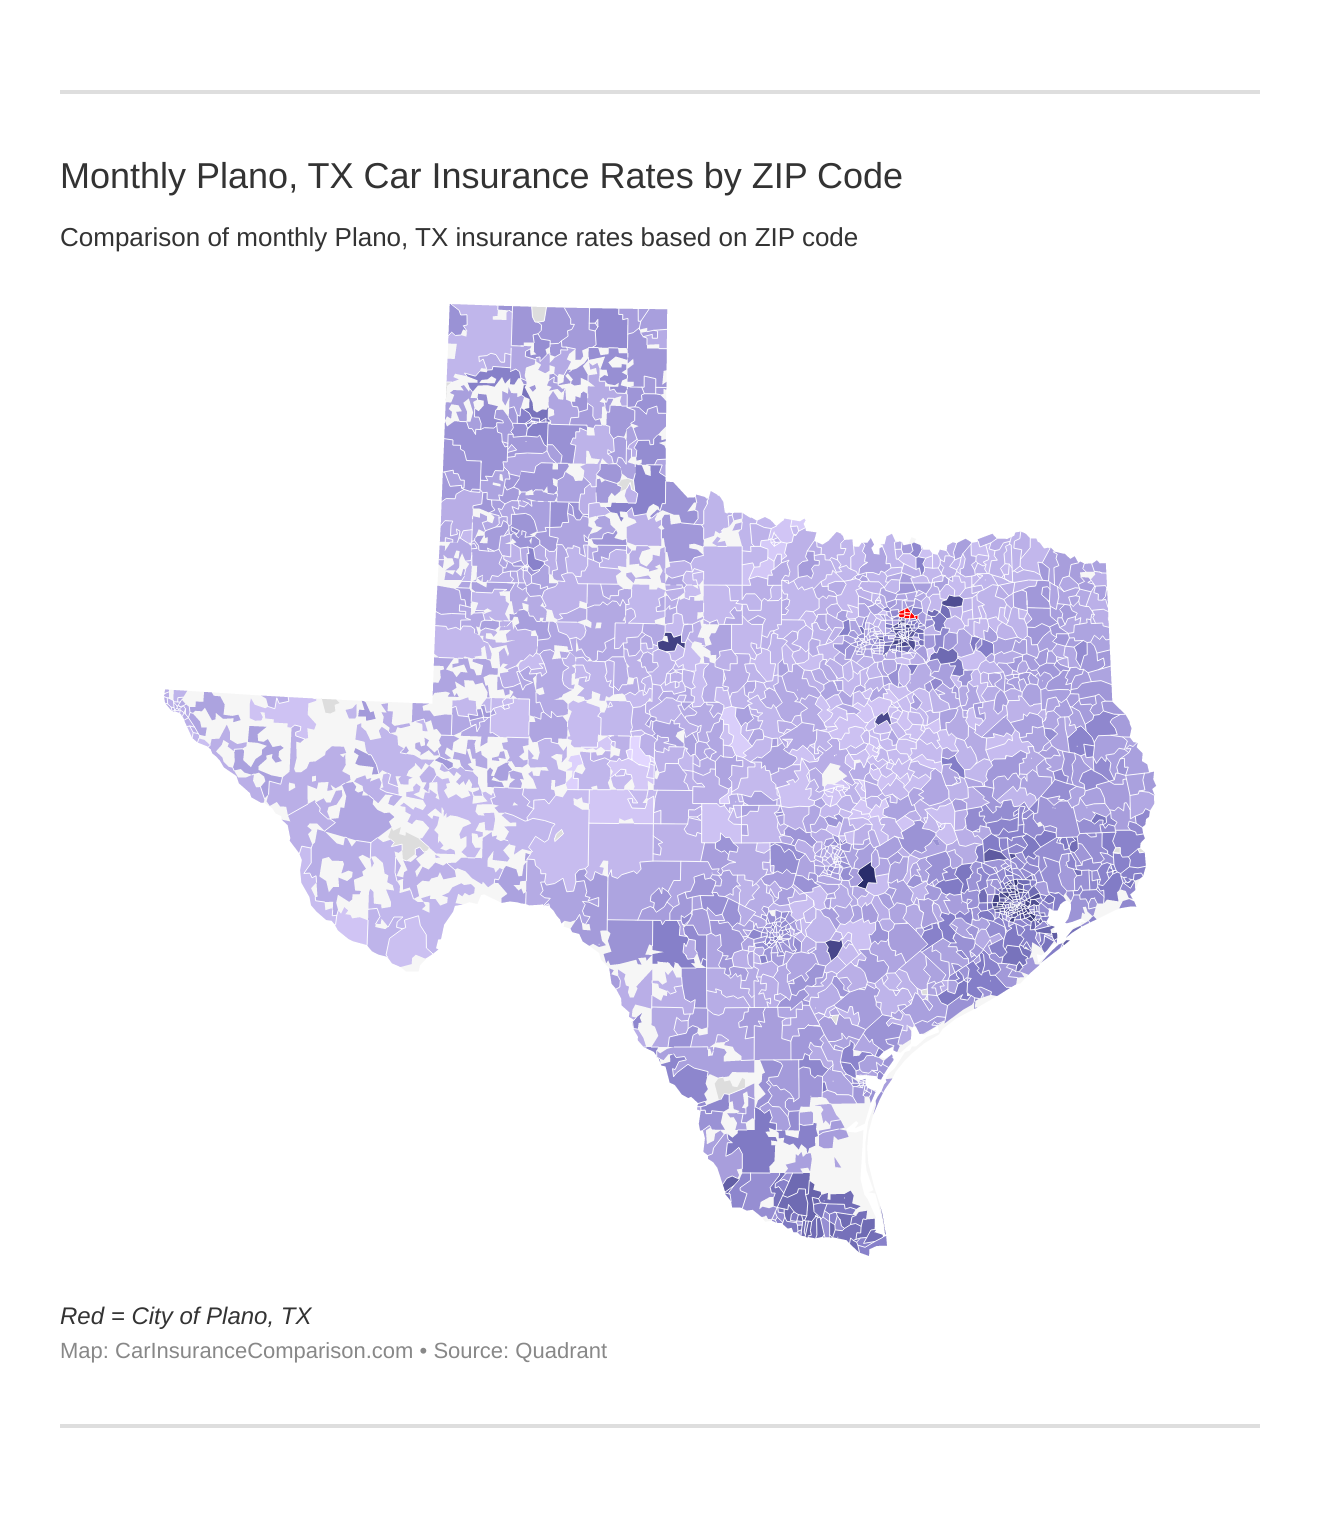 Monthly Plano, TX Car Insurance Rates by ZIP Code